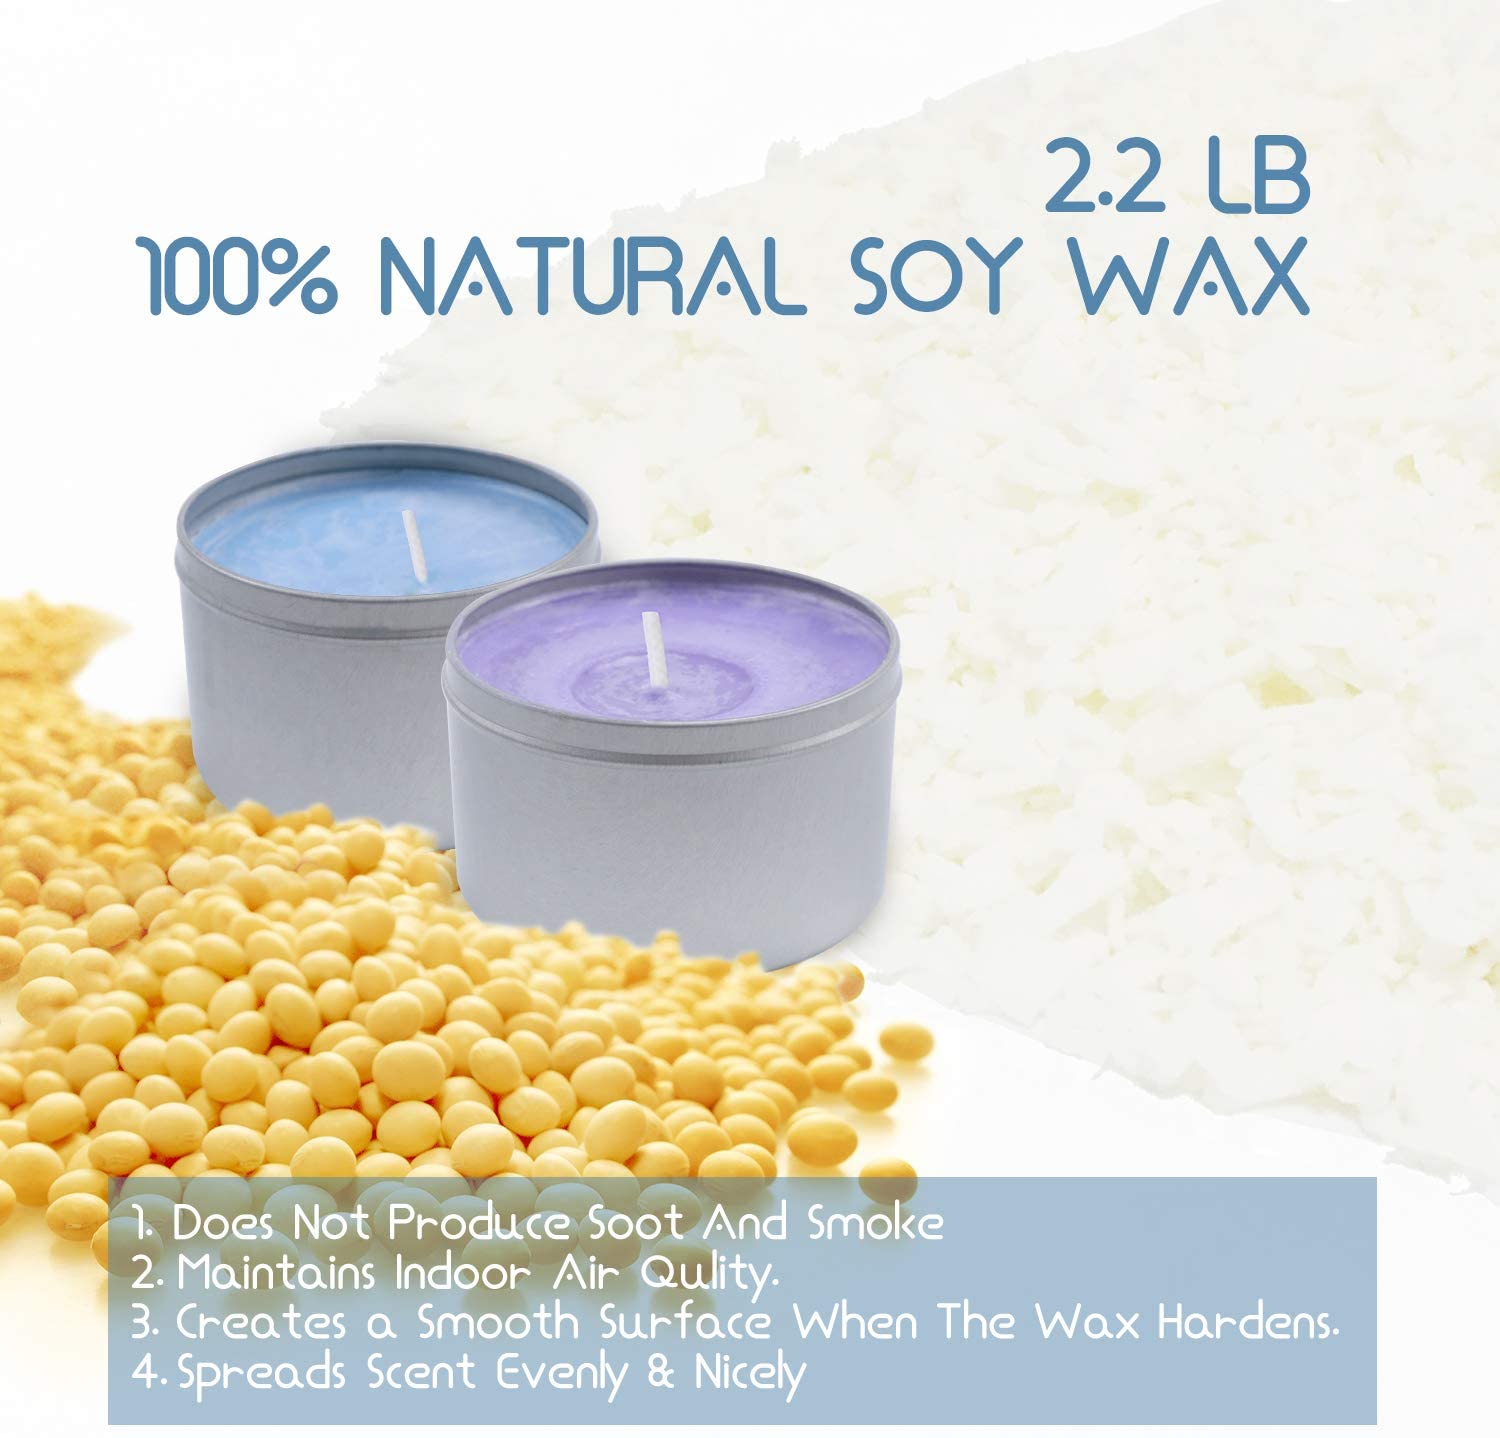 Hearth & Harbor Natural Soy Candle Wax for Candle Making with DIY Candle Making Supplies, 100 Cotton Wicks, 2 Metal Centering Devices and 100 Glue